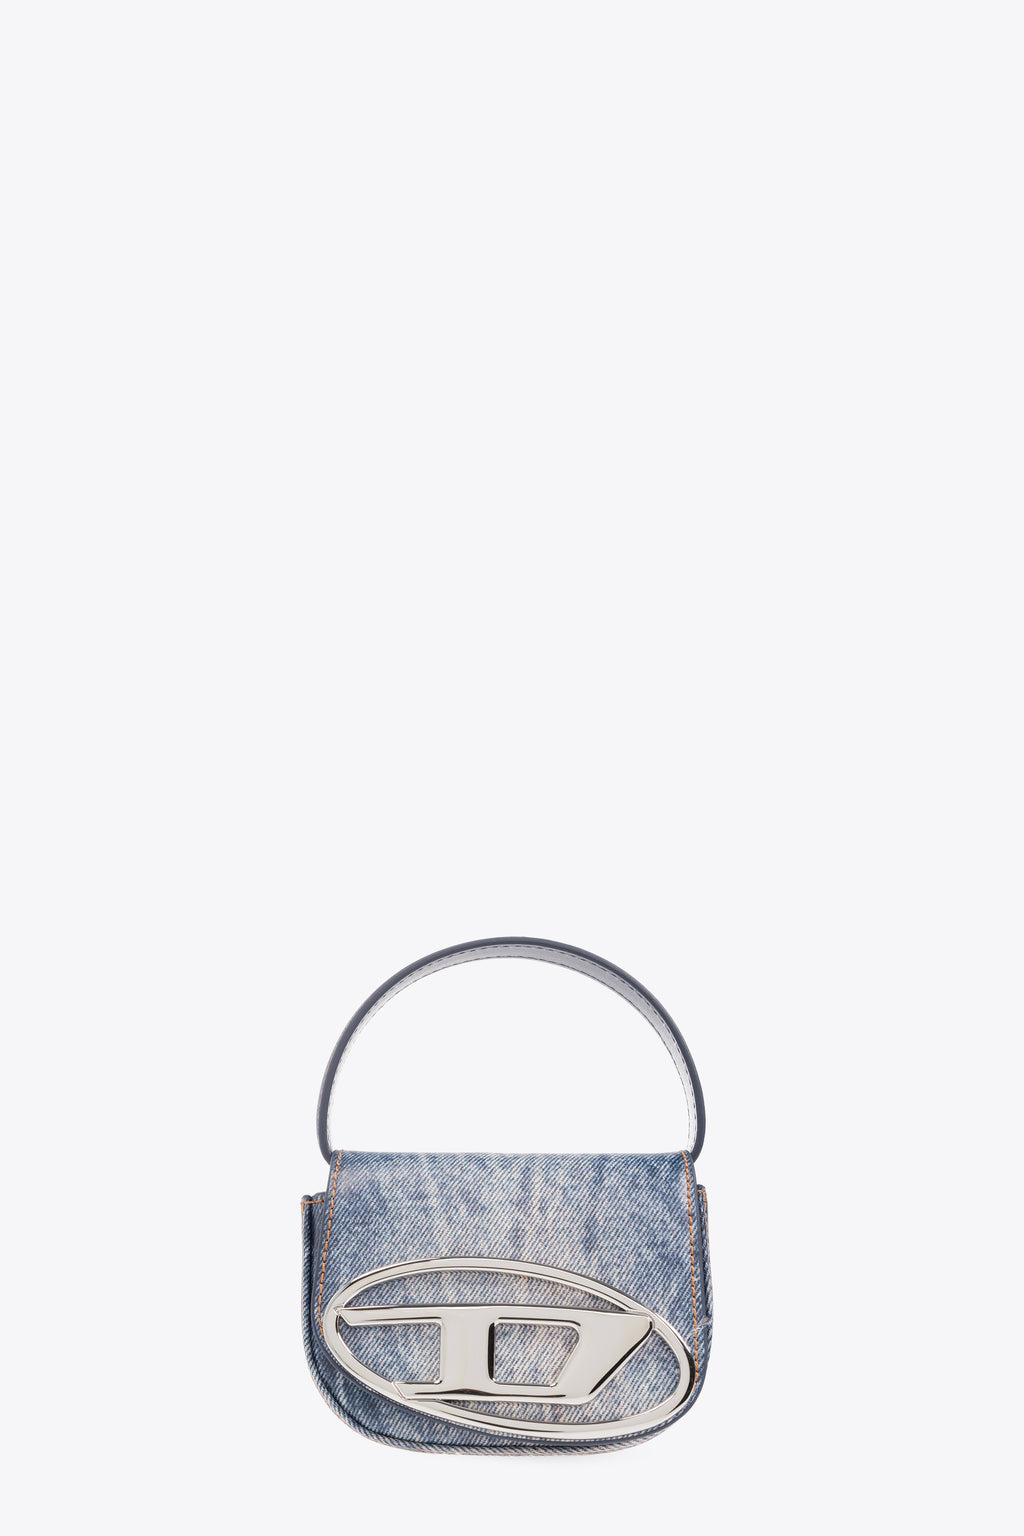 alt-image__Digital-denim-printed-leather-small-bag-with-Oval-D---1DR-XS-Crossbody-Bag--